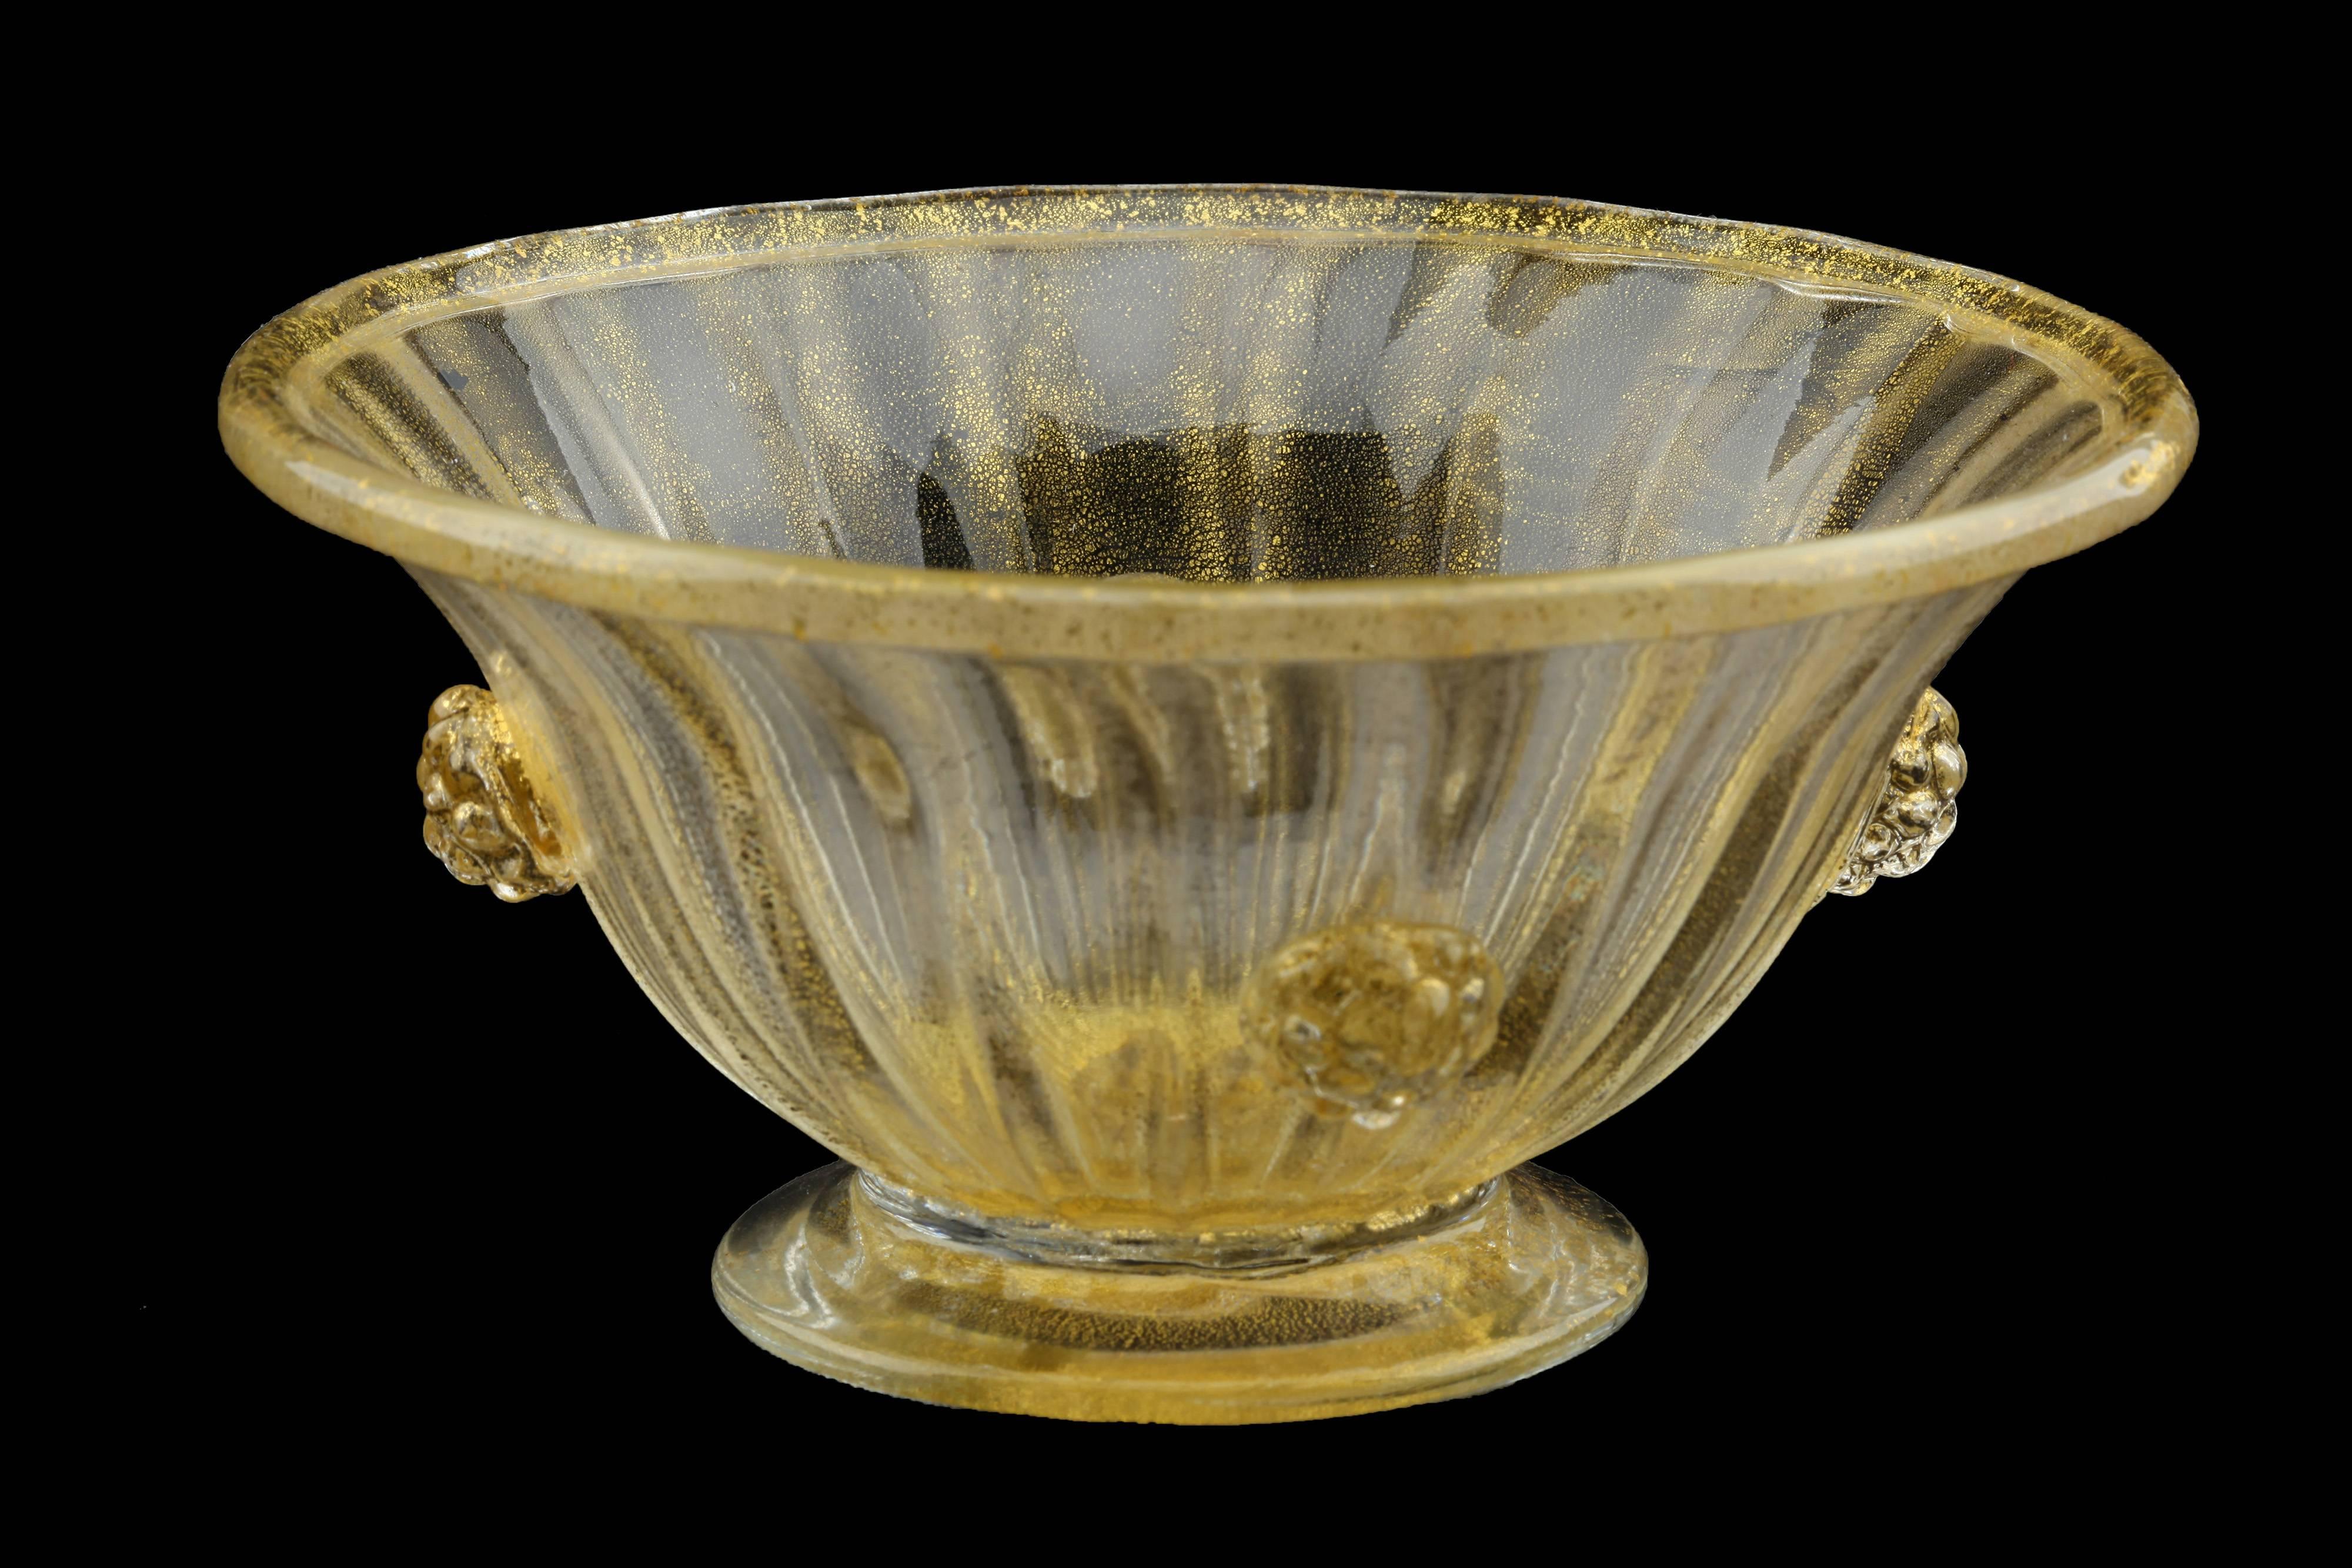 Casa del Regalo Bortoli Murano gold foil bowl from the 1950s. 

Measures: Height 8 cm / 3.1 inch 
Diameter 15 cm / 5.9 inch

It is in a good, undamaged condition. 
Please note that these vintage objects always show -some- degree of signs of